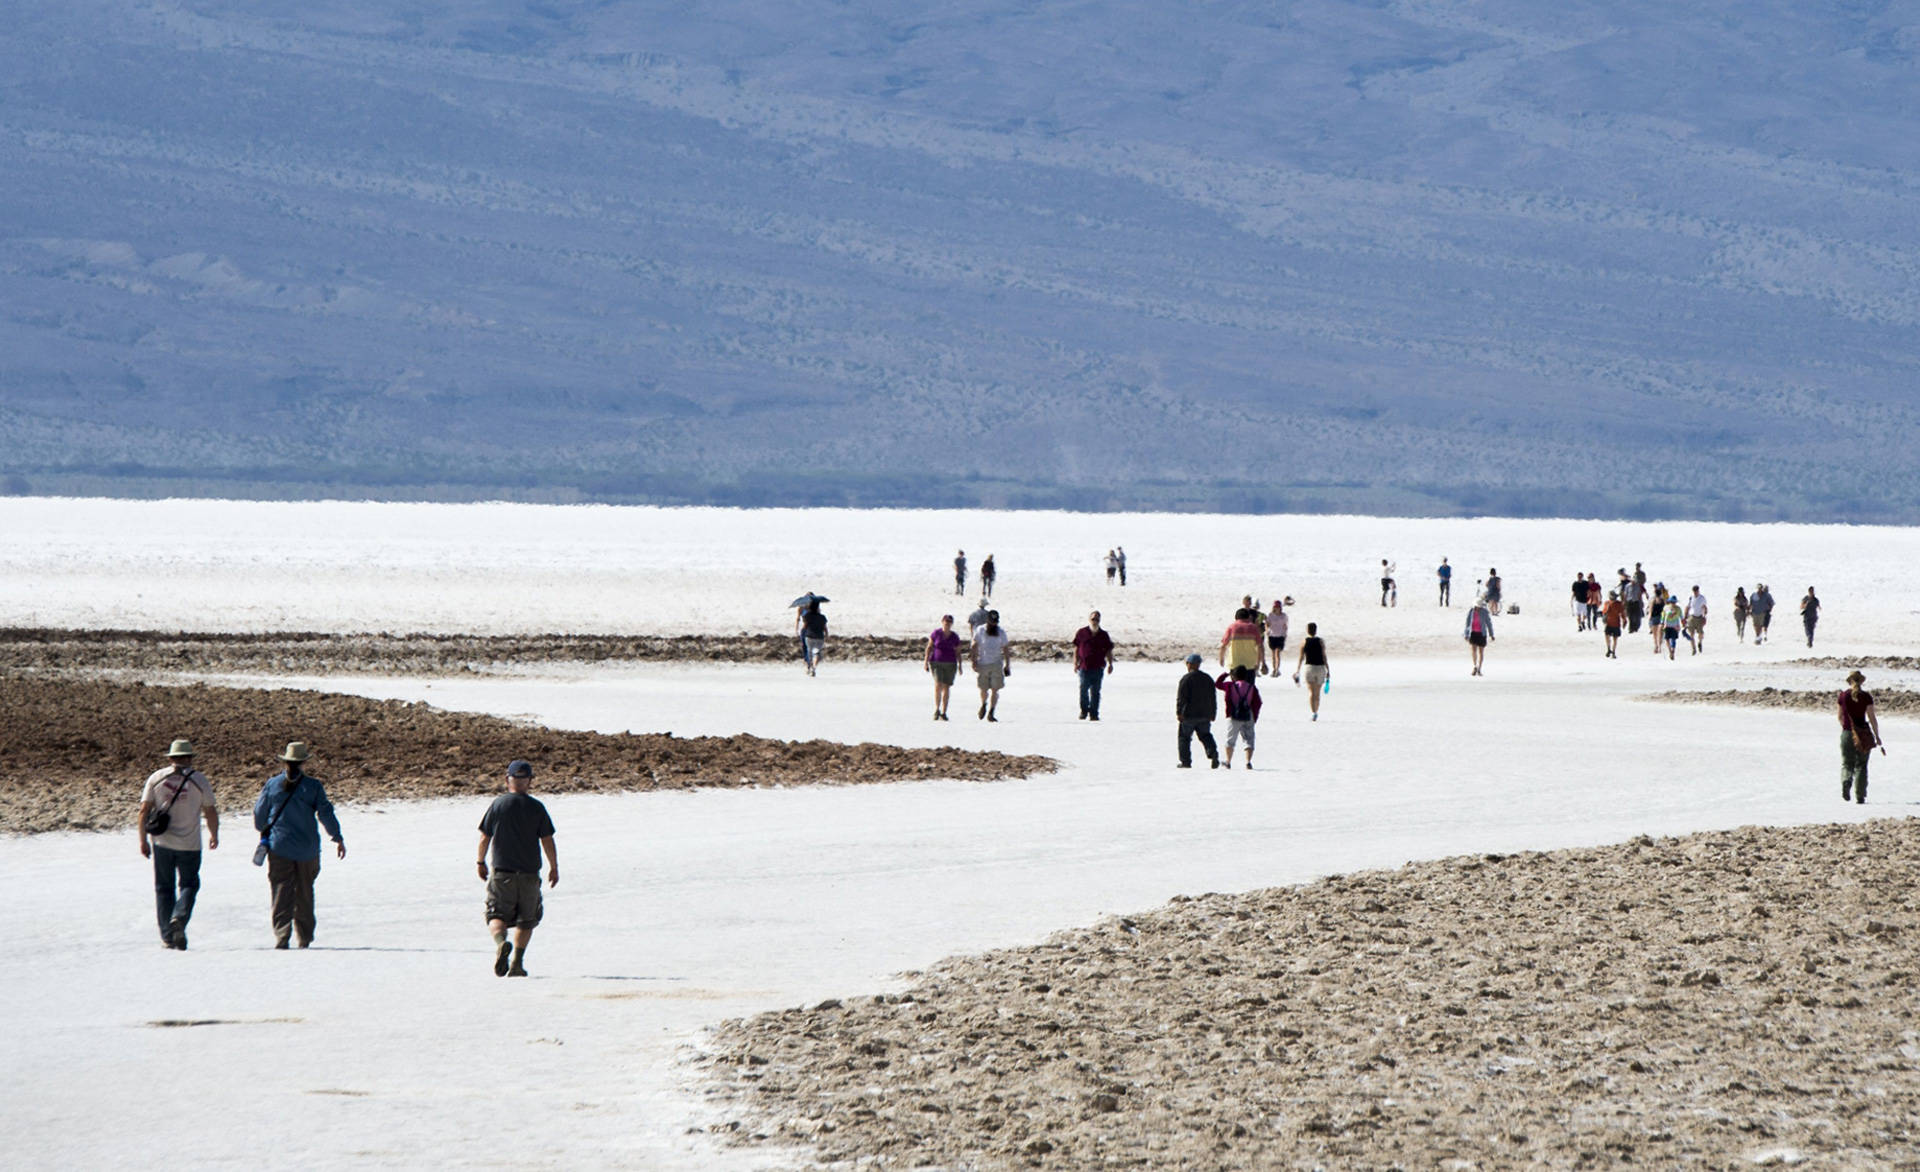 Tourists walk on the salt pan at Badwater Basin in Death Valley National Park. ROBYN BECK/AFP/Getty Images